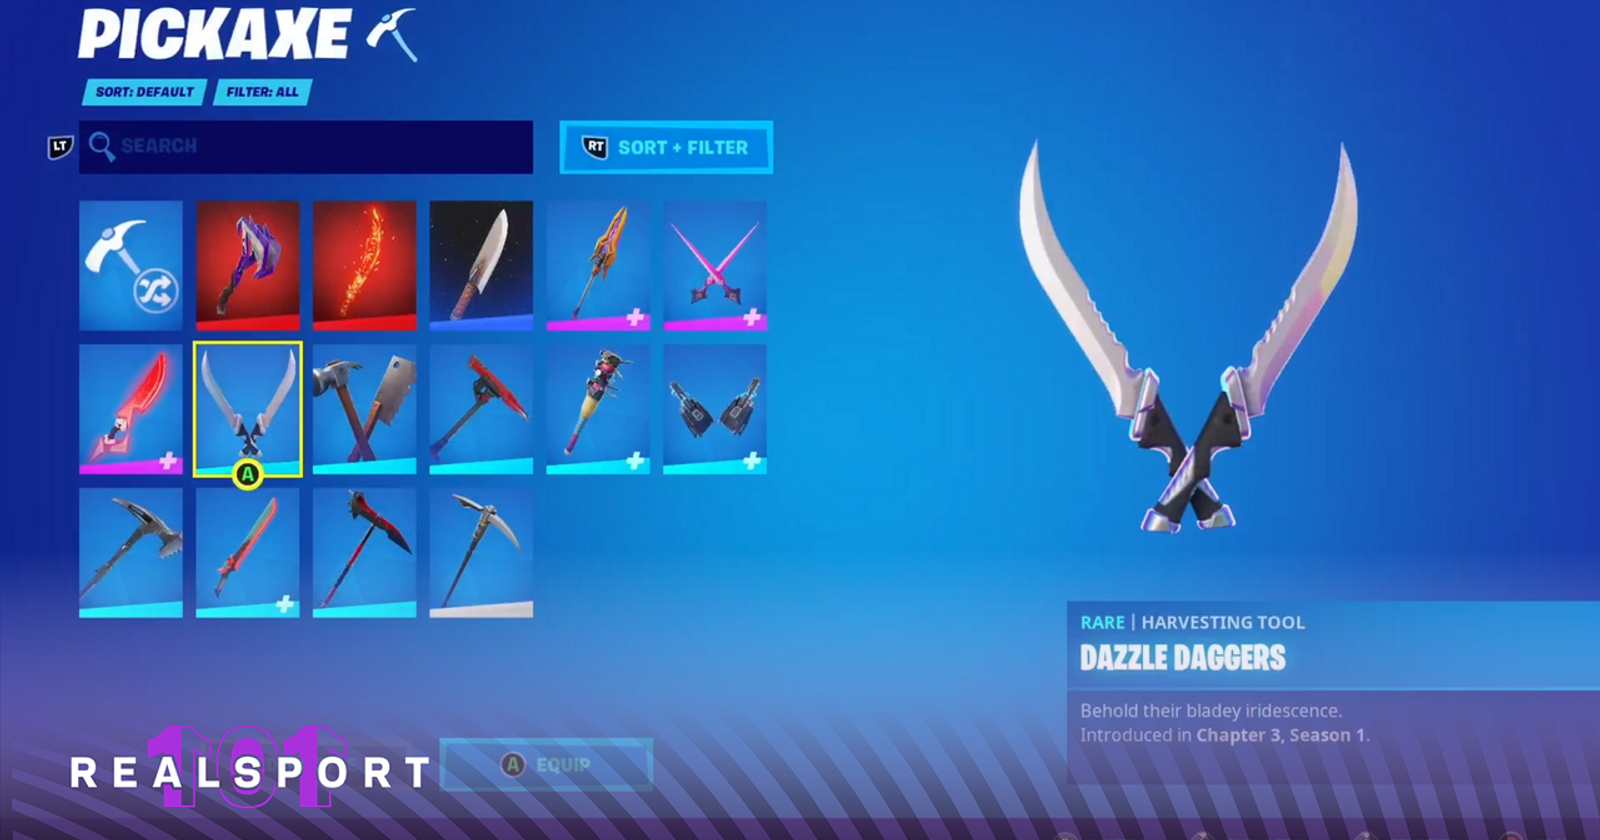 How to get Xbox Cloud Gaming Fortnite Free Dazzle Daggers Pickaxe